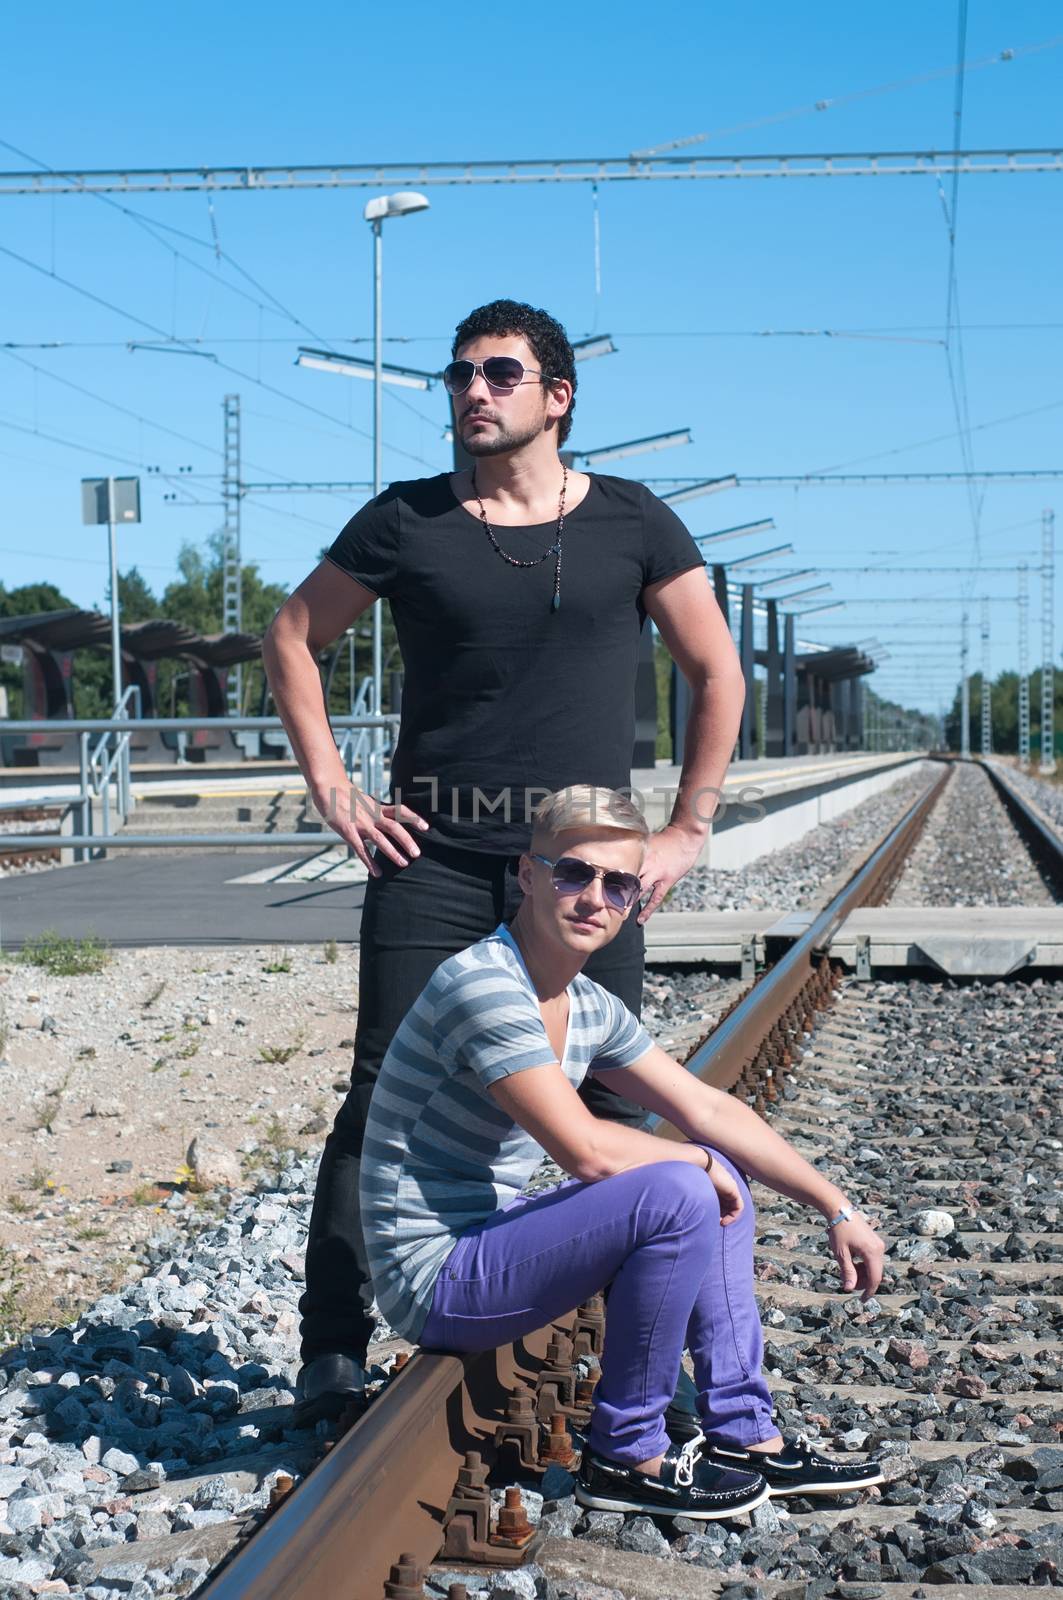 Two guys on train tracks by anytka